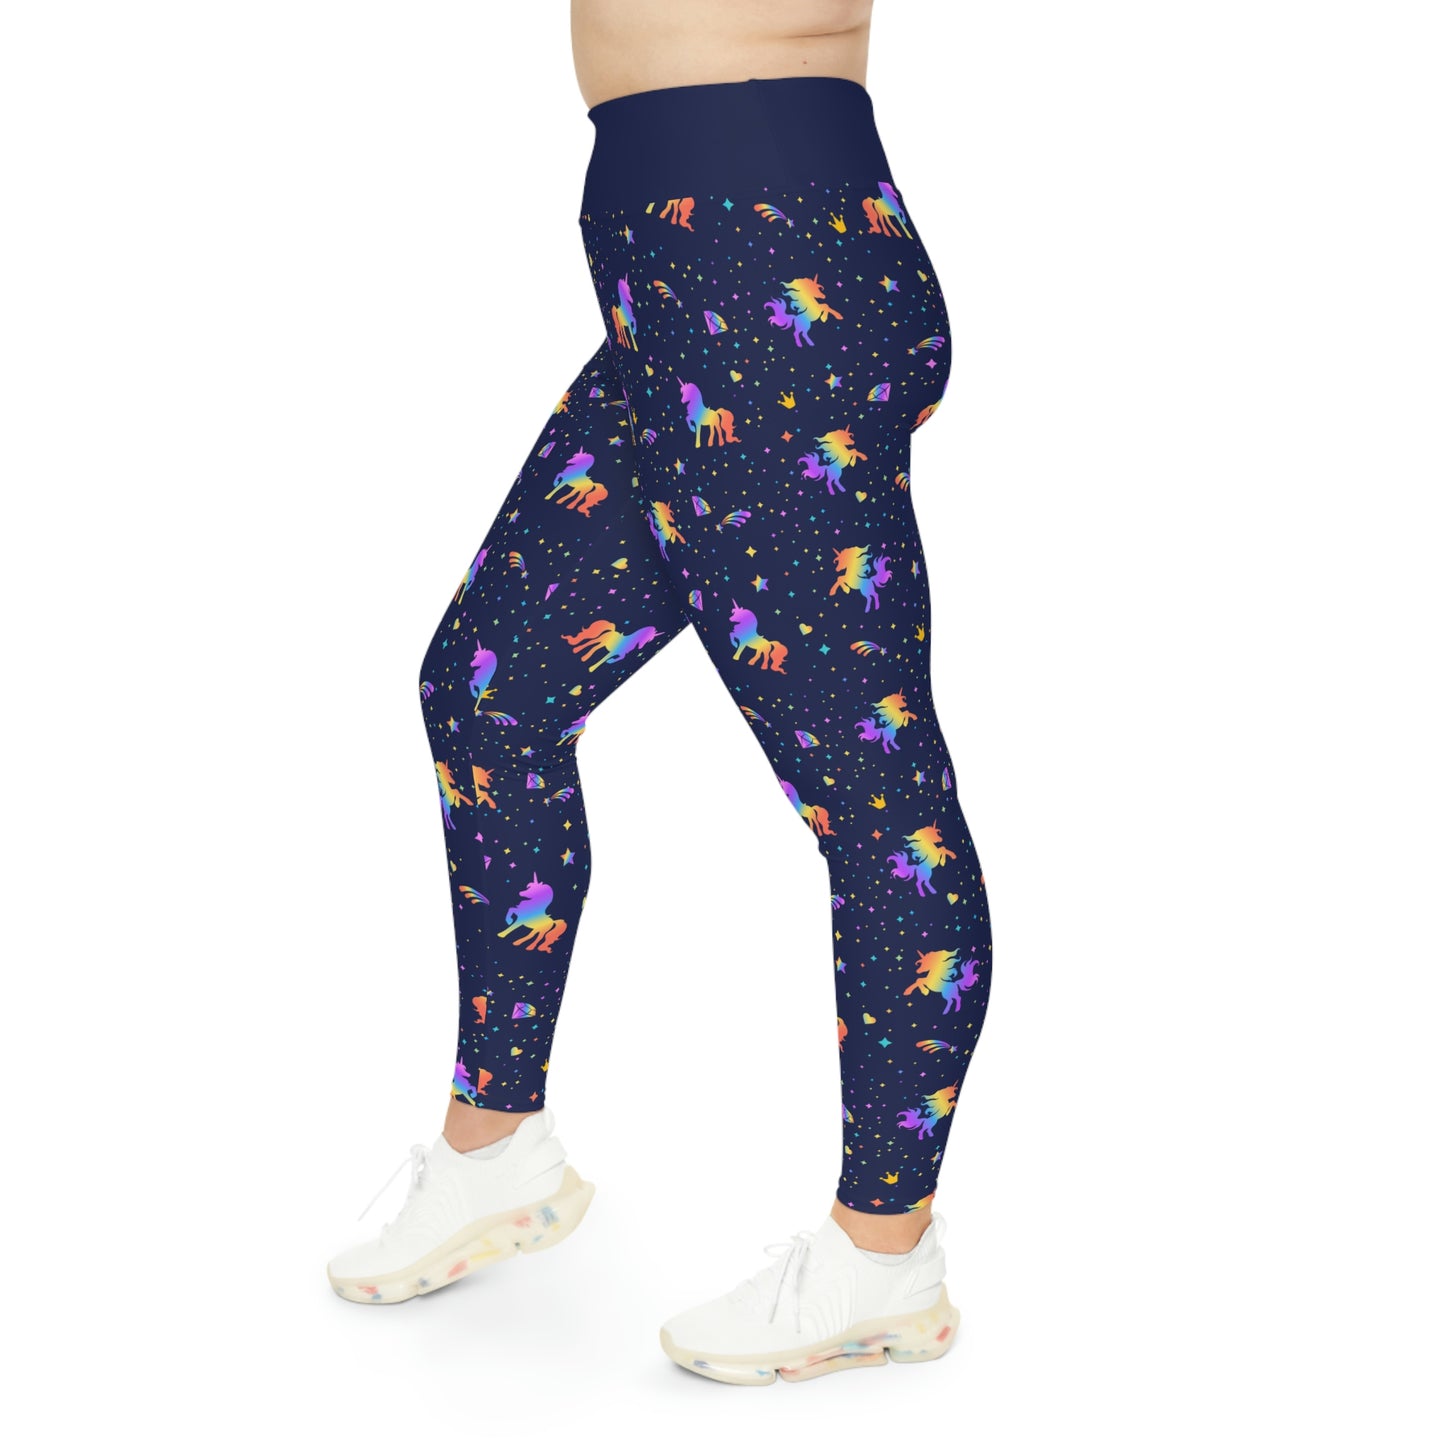 Unicorn Plus Size Leggings One of a Kind Gift - Unique Workout Activewear tights for Mom fitness, Mothers Day, Girlfriend Christmas Gift